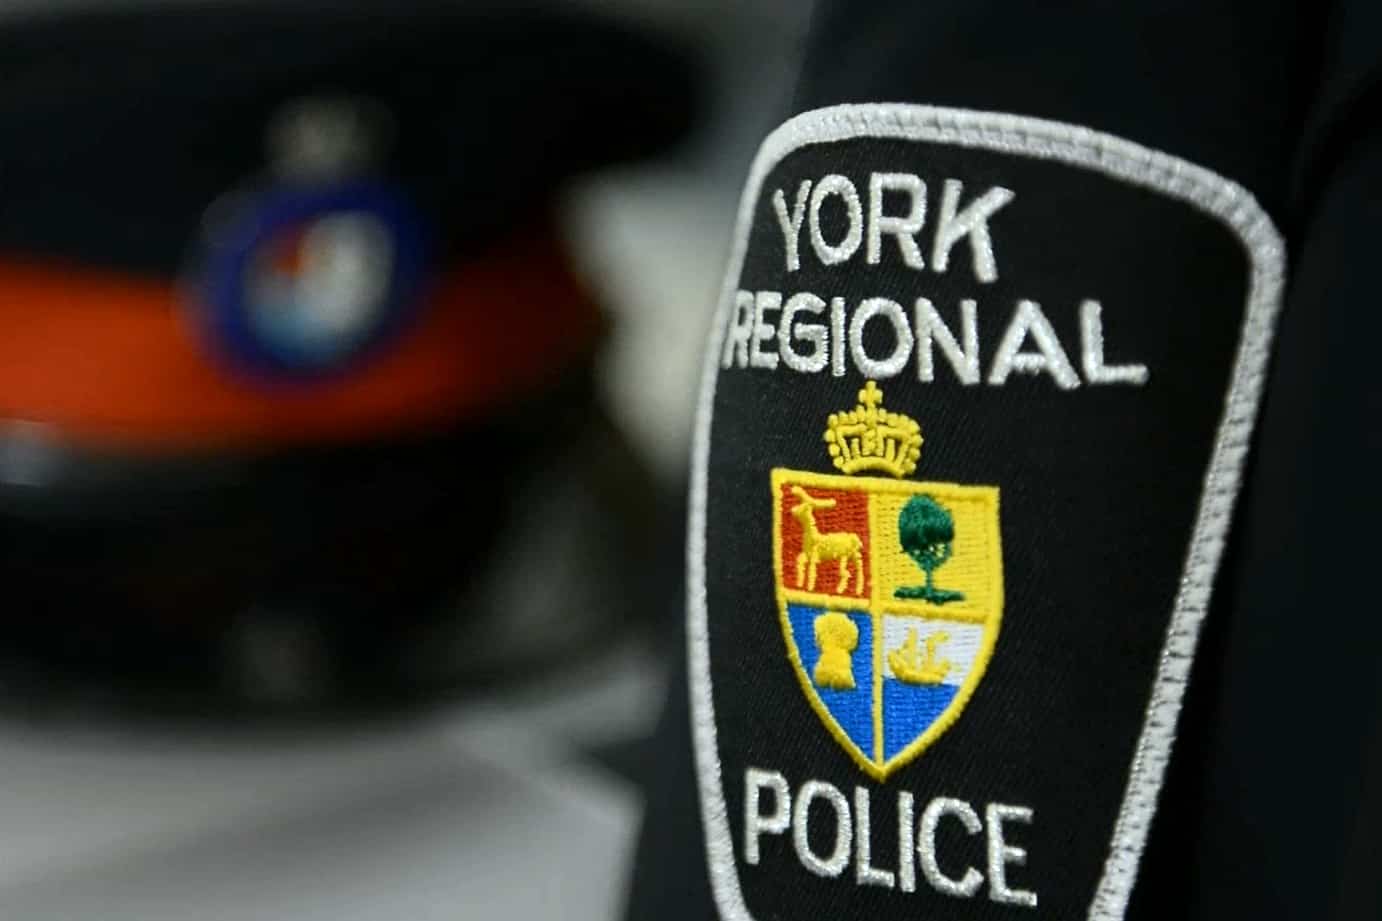 Four people have been shot in York